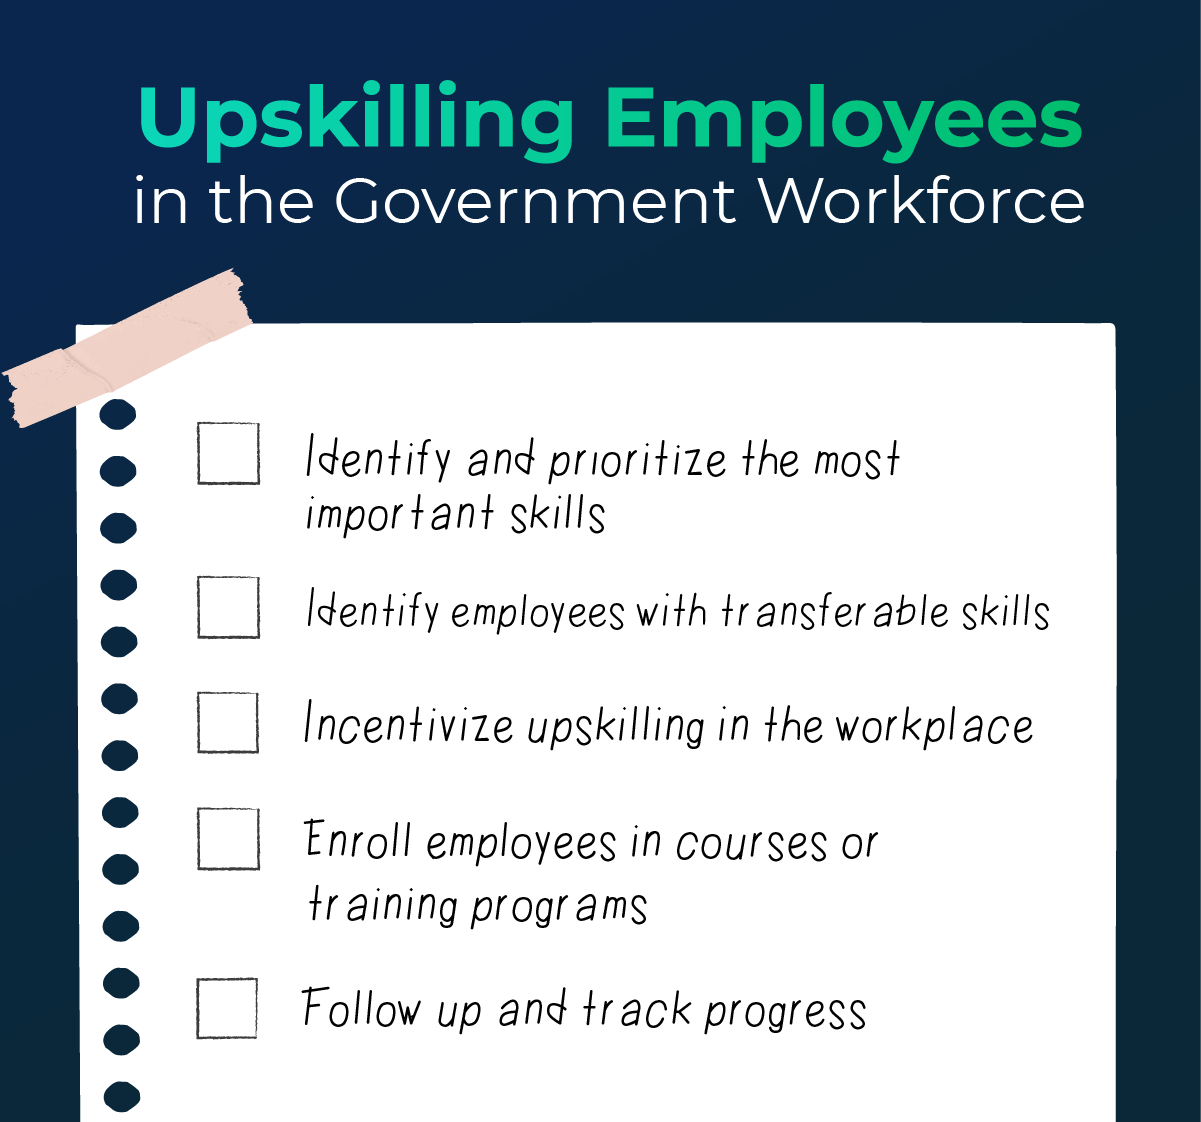 List of steps to upskill employees in the government workforce.